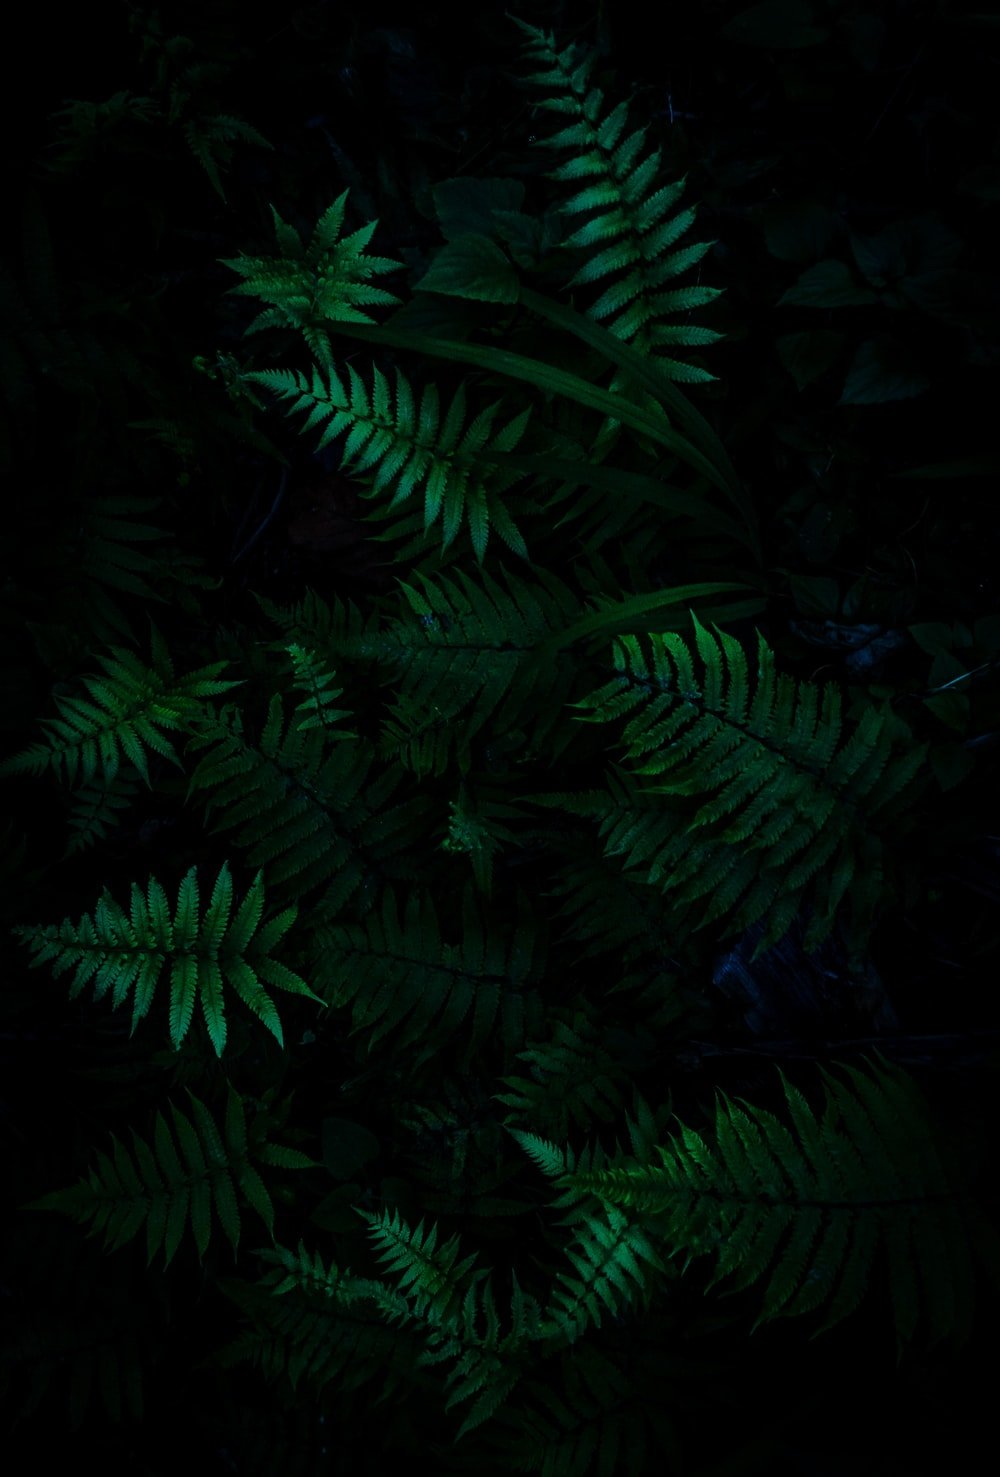 Black And Green Picture. Download Free Image